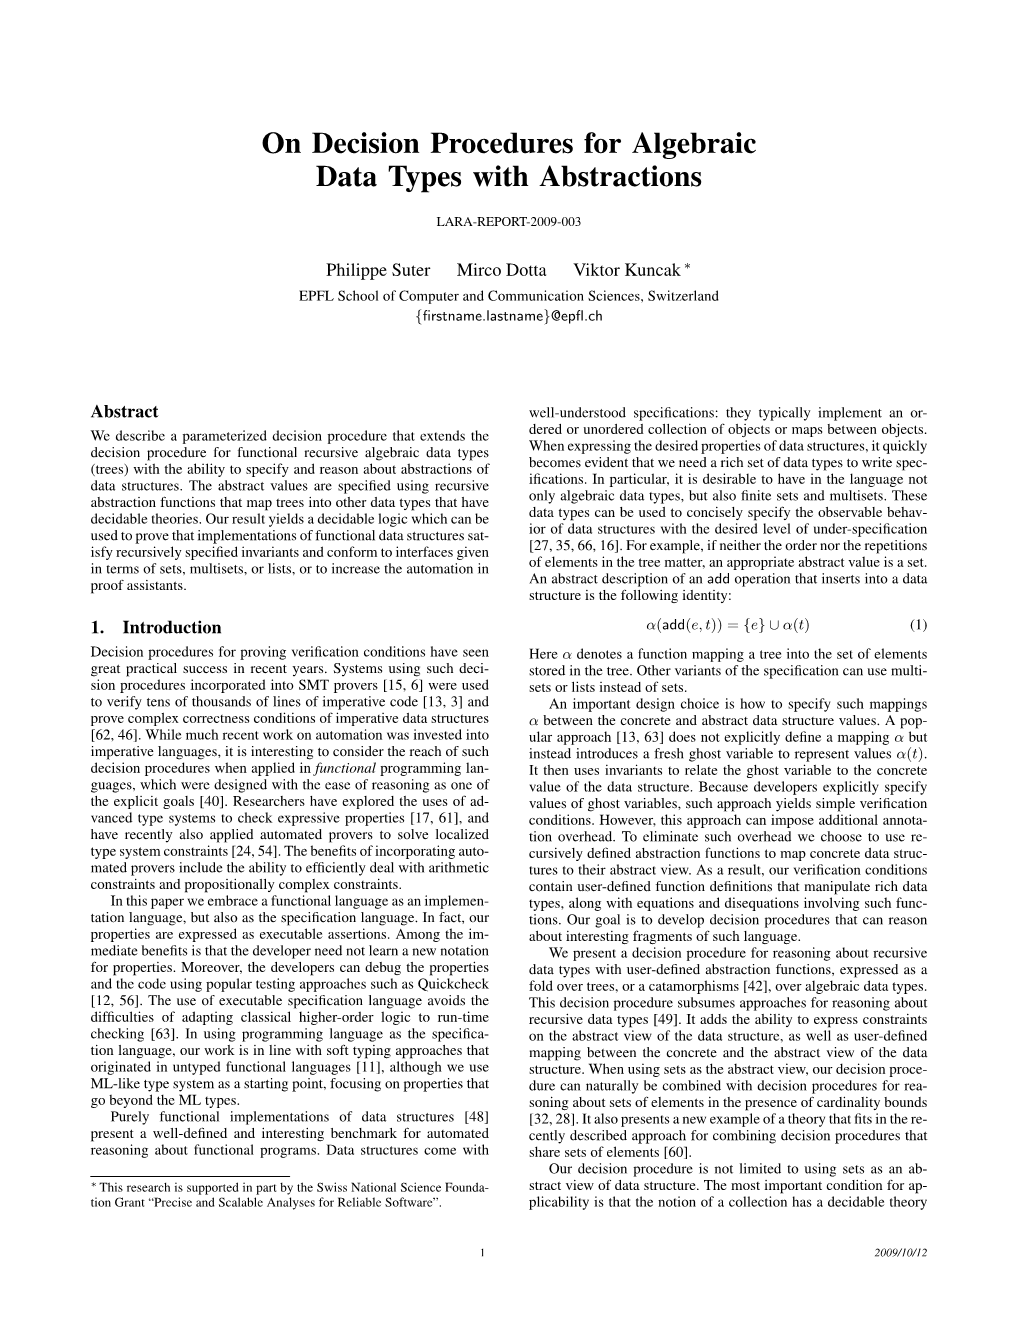 On Decision Procedures for Algebraic Data Types with Abstractions